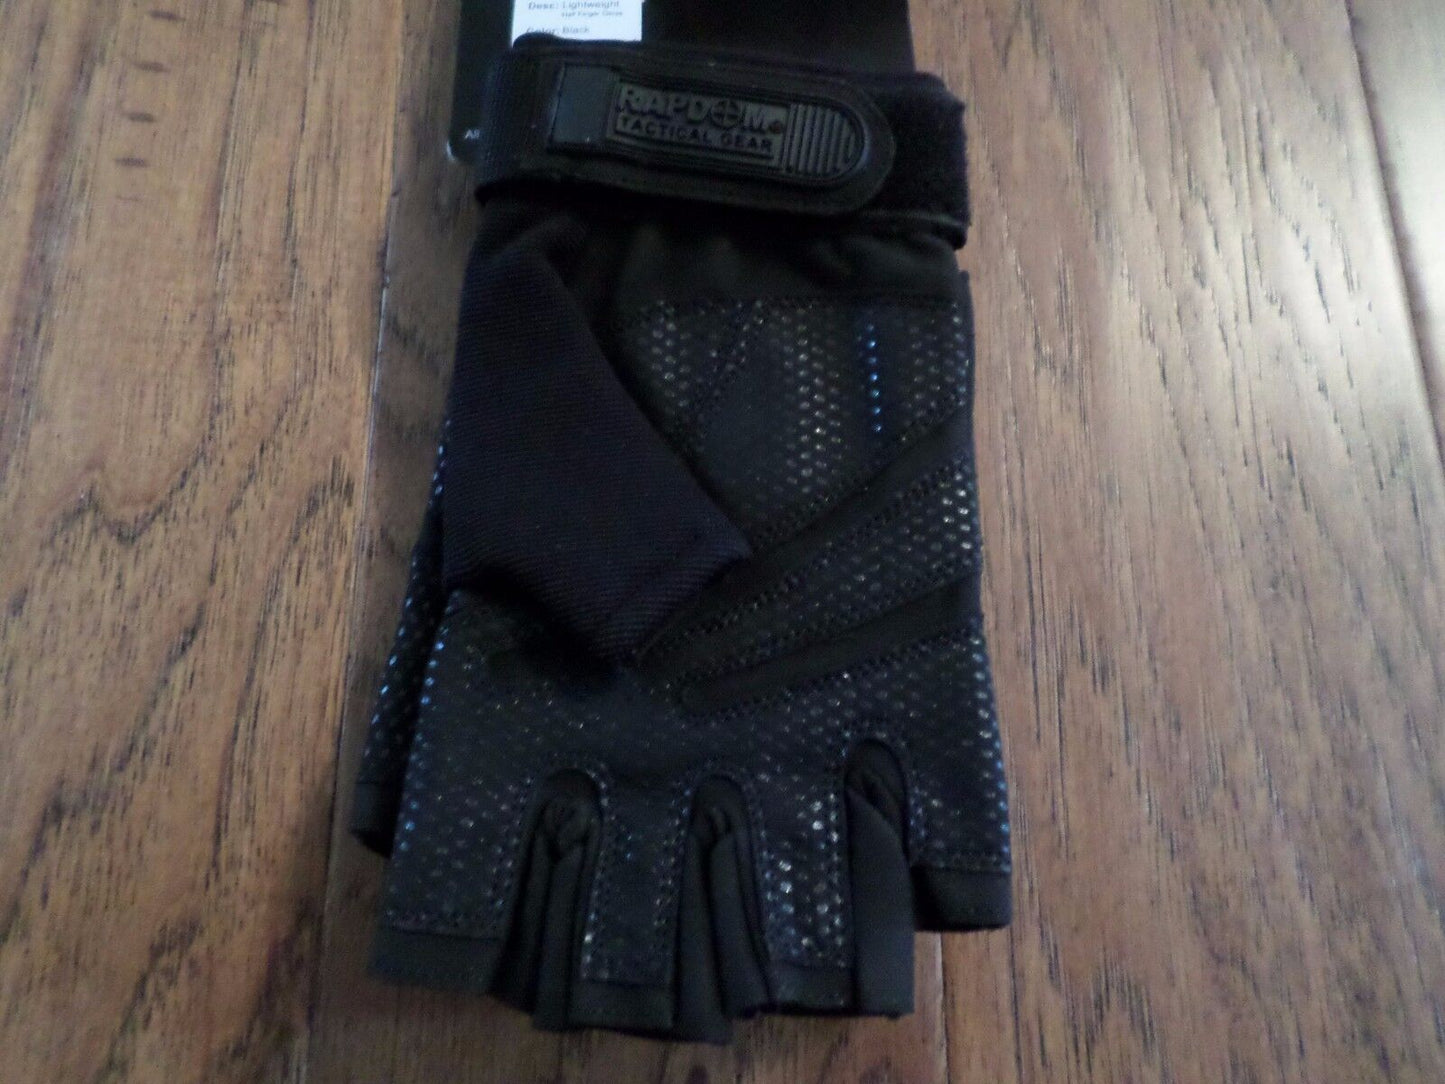 Half Finger Lightweight Tactical Shooters Gloves Patrol Military Specs Padded XL